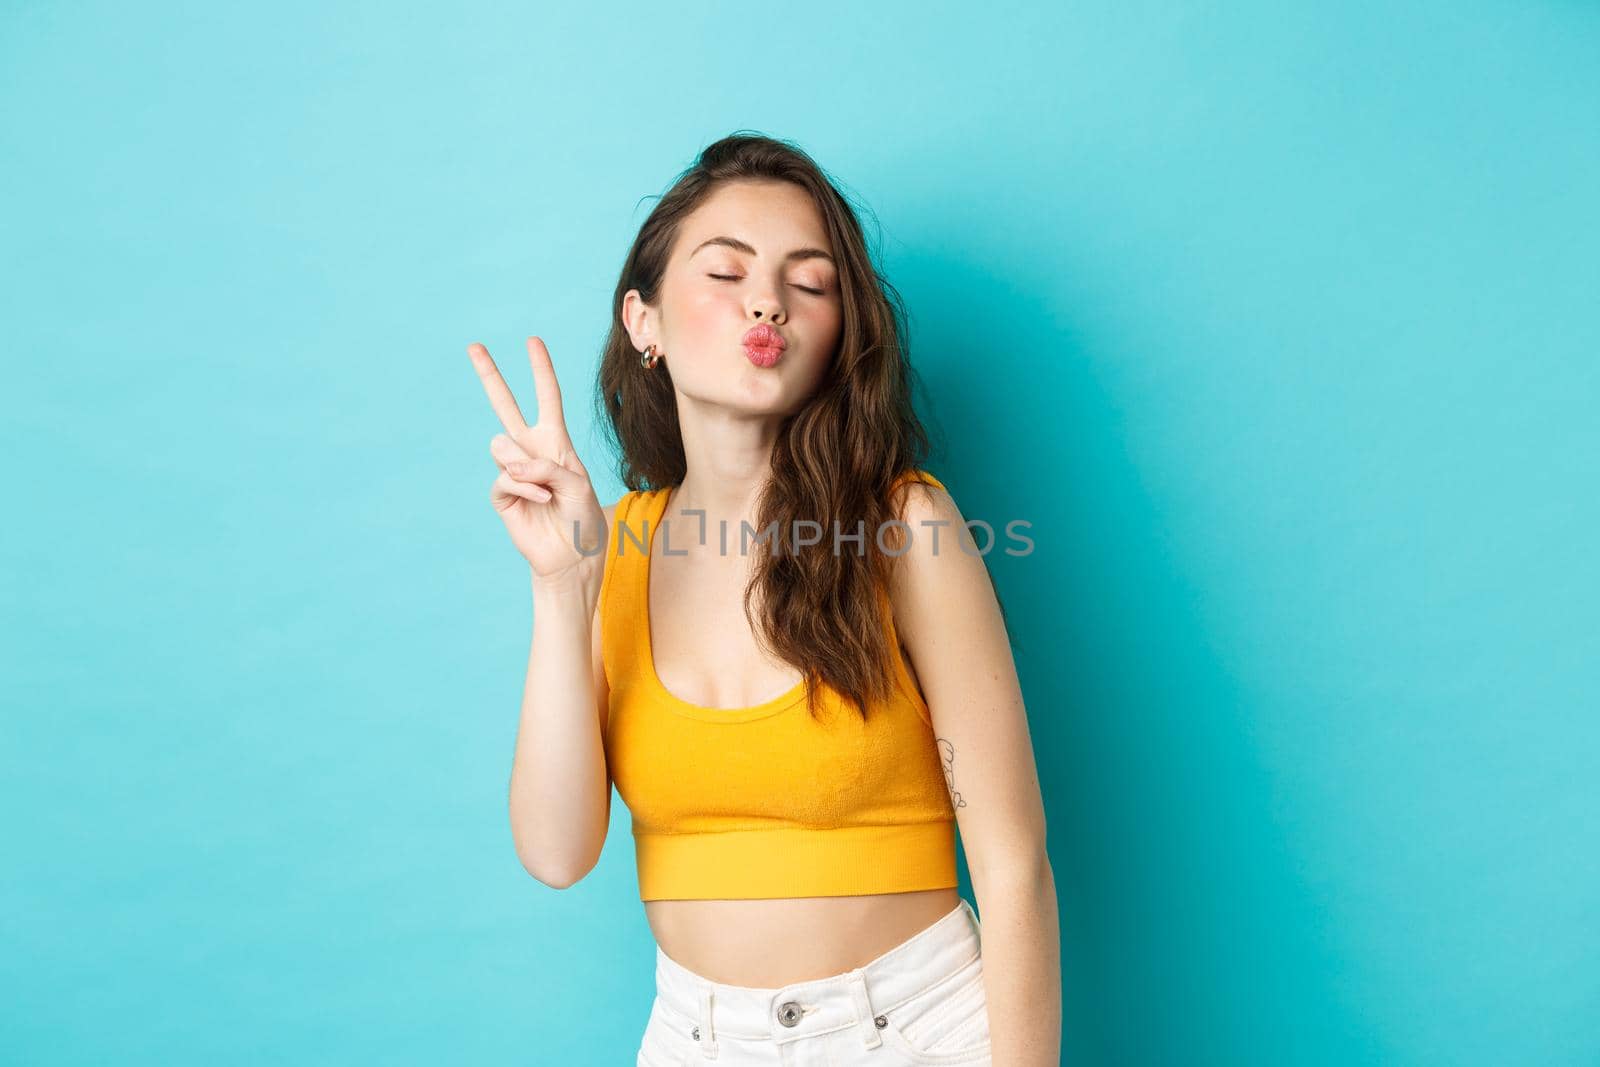 Glamour girl in summer clothes close her eyes and making kissing face with v-sign, enjoying vacation, having fun, standing relaxed against blue background.